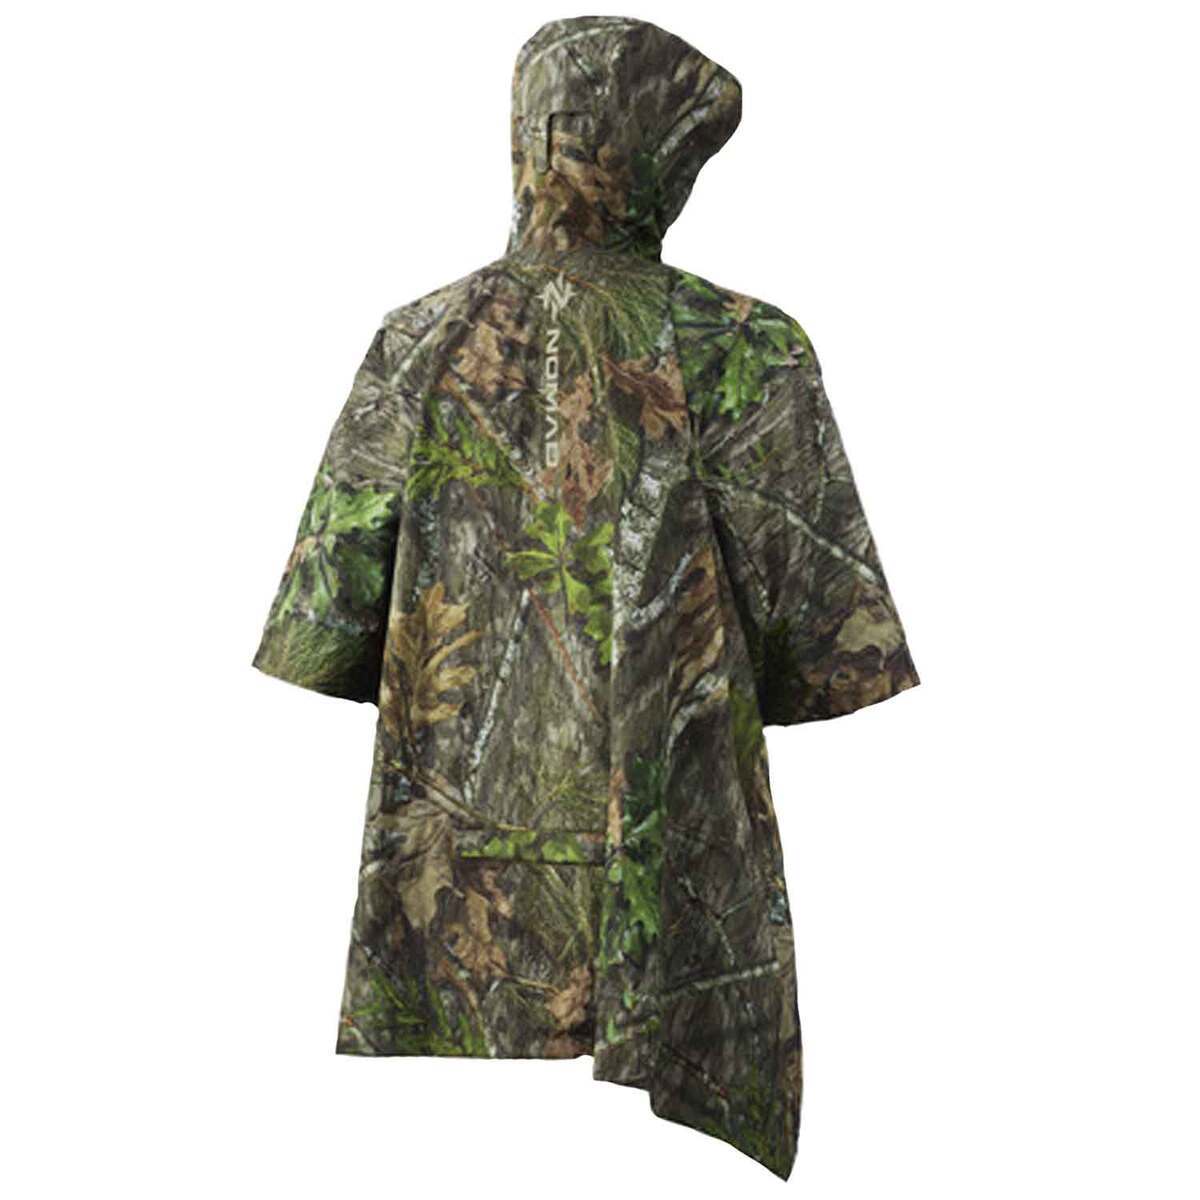 Nomad Men's NWTF Poncho - Mossy Oak Obsession - One Size Fits Most ...